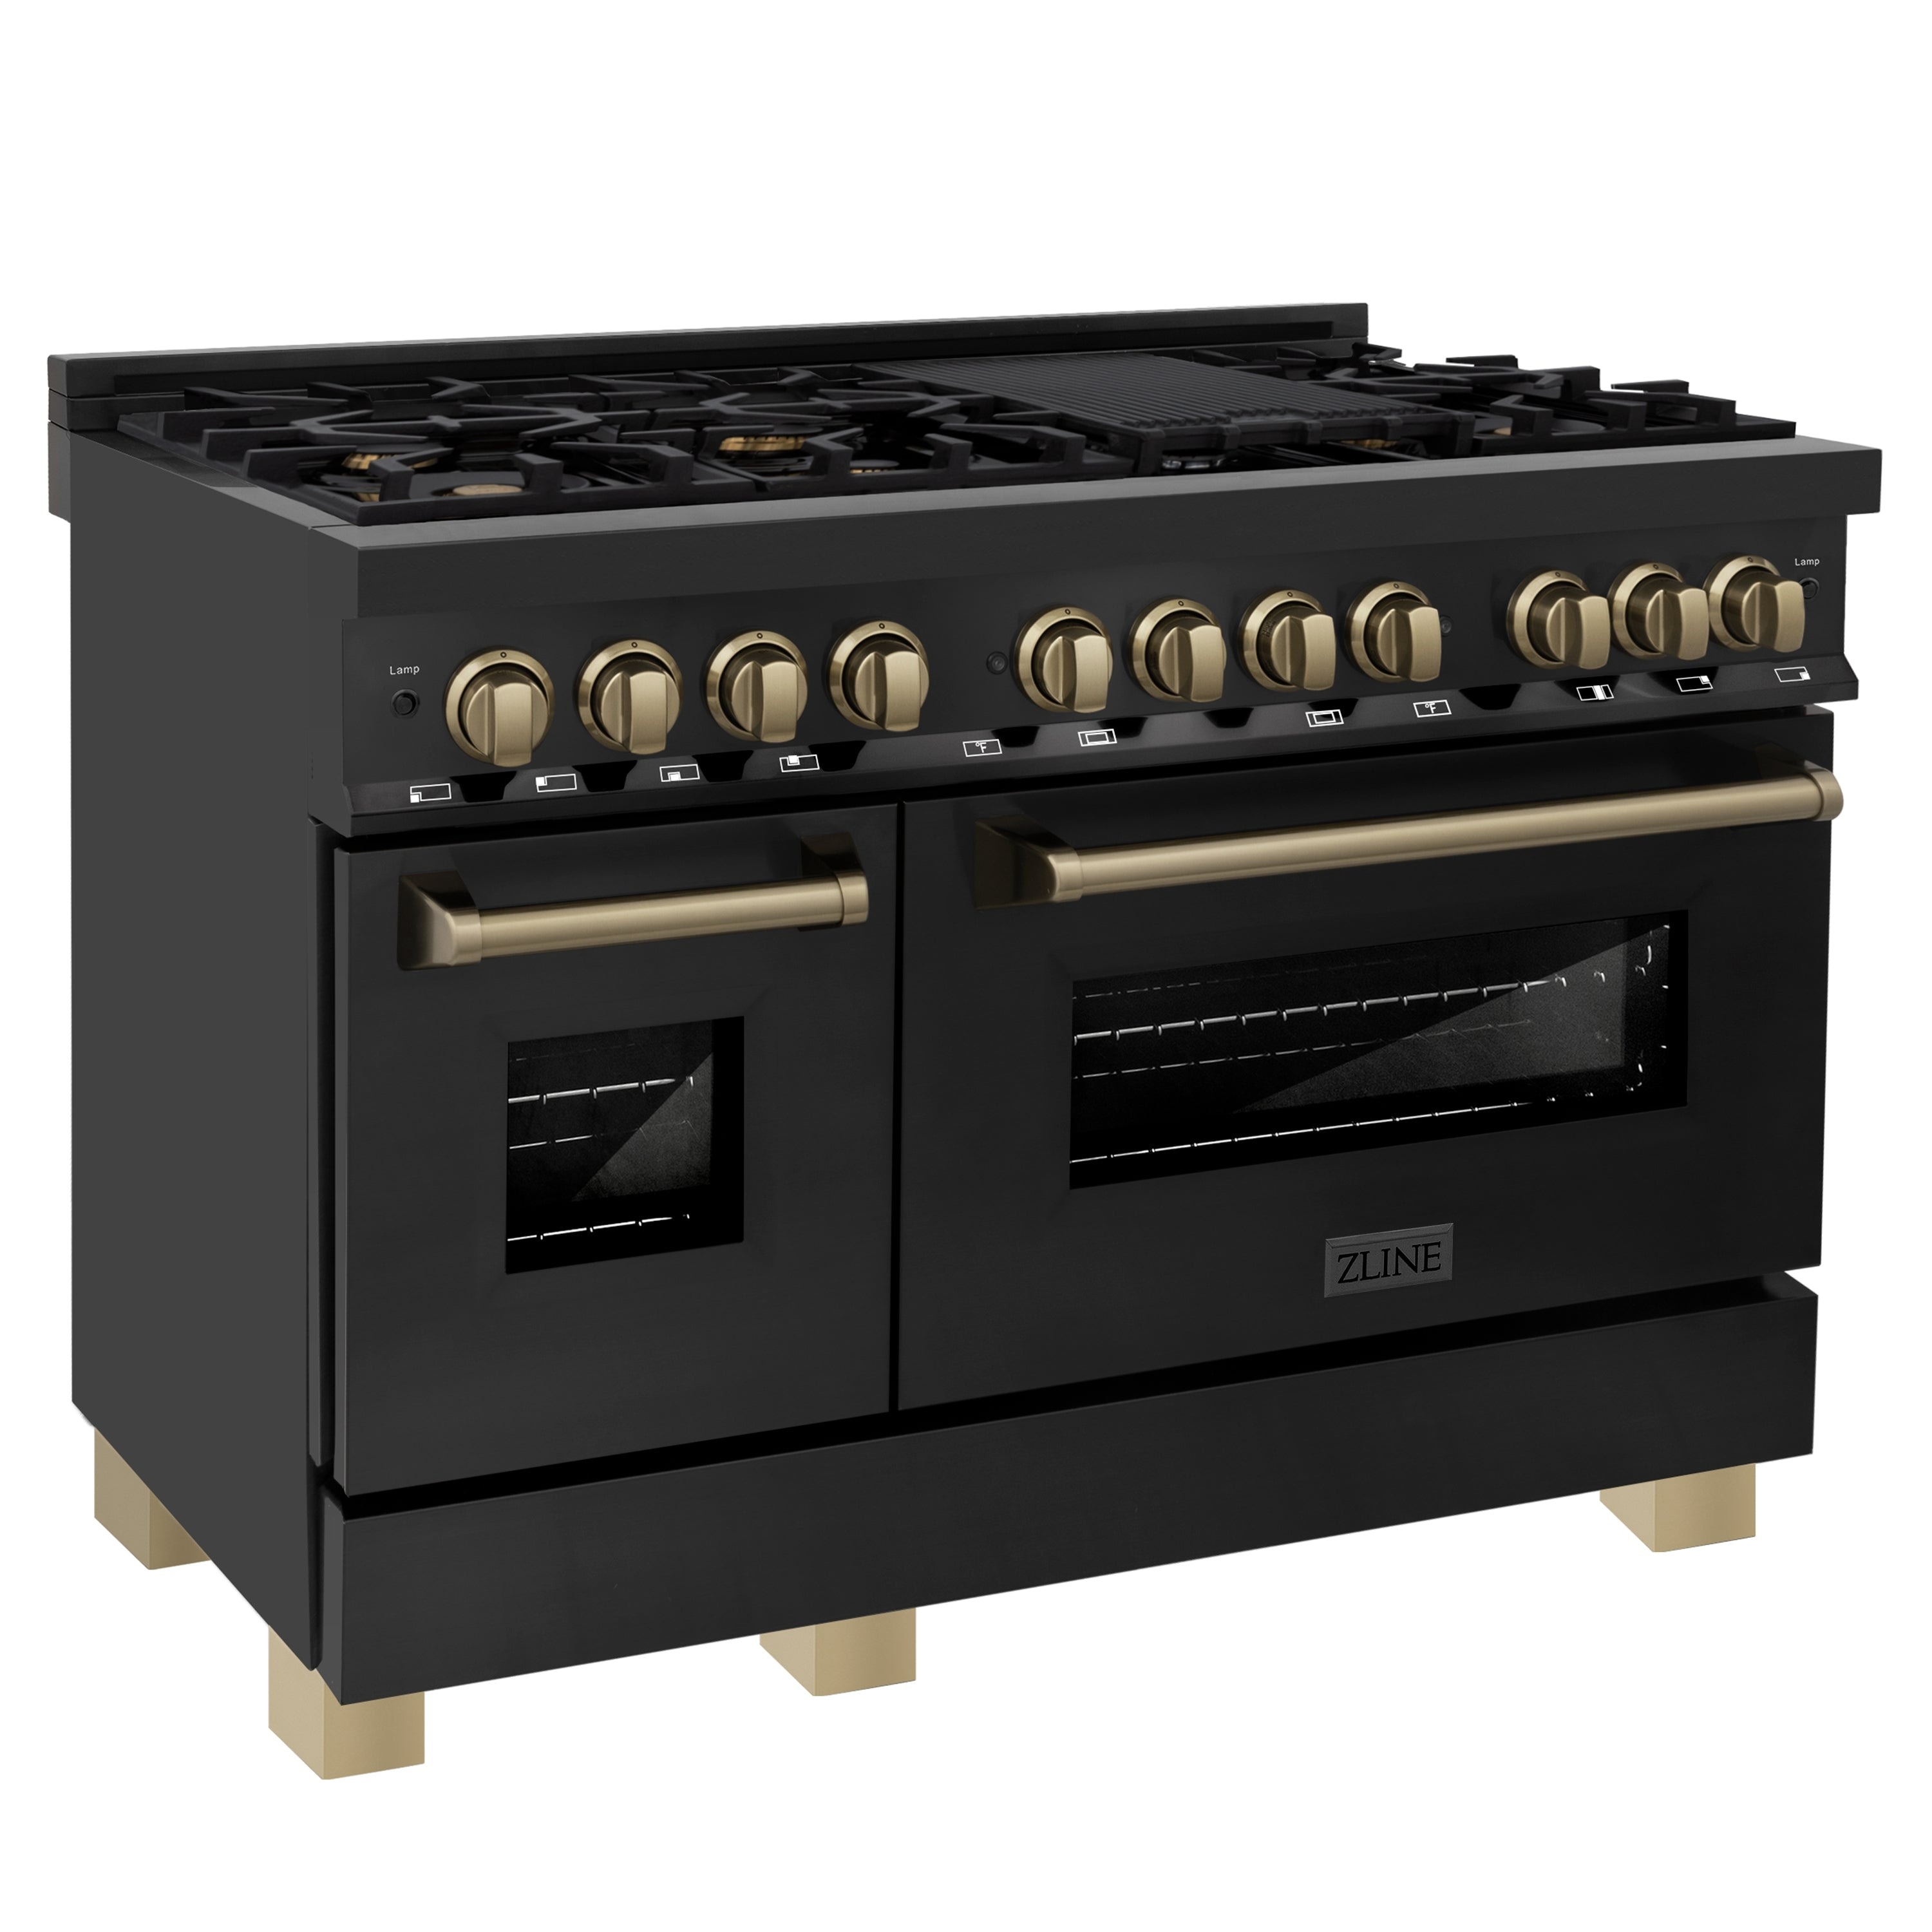 Zline Kitchen and Bath ZLINE Autograph Edition 48" Dual Fuel Range in Black Stainless Steel with Accents